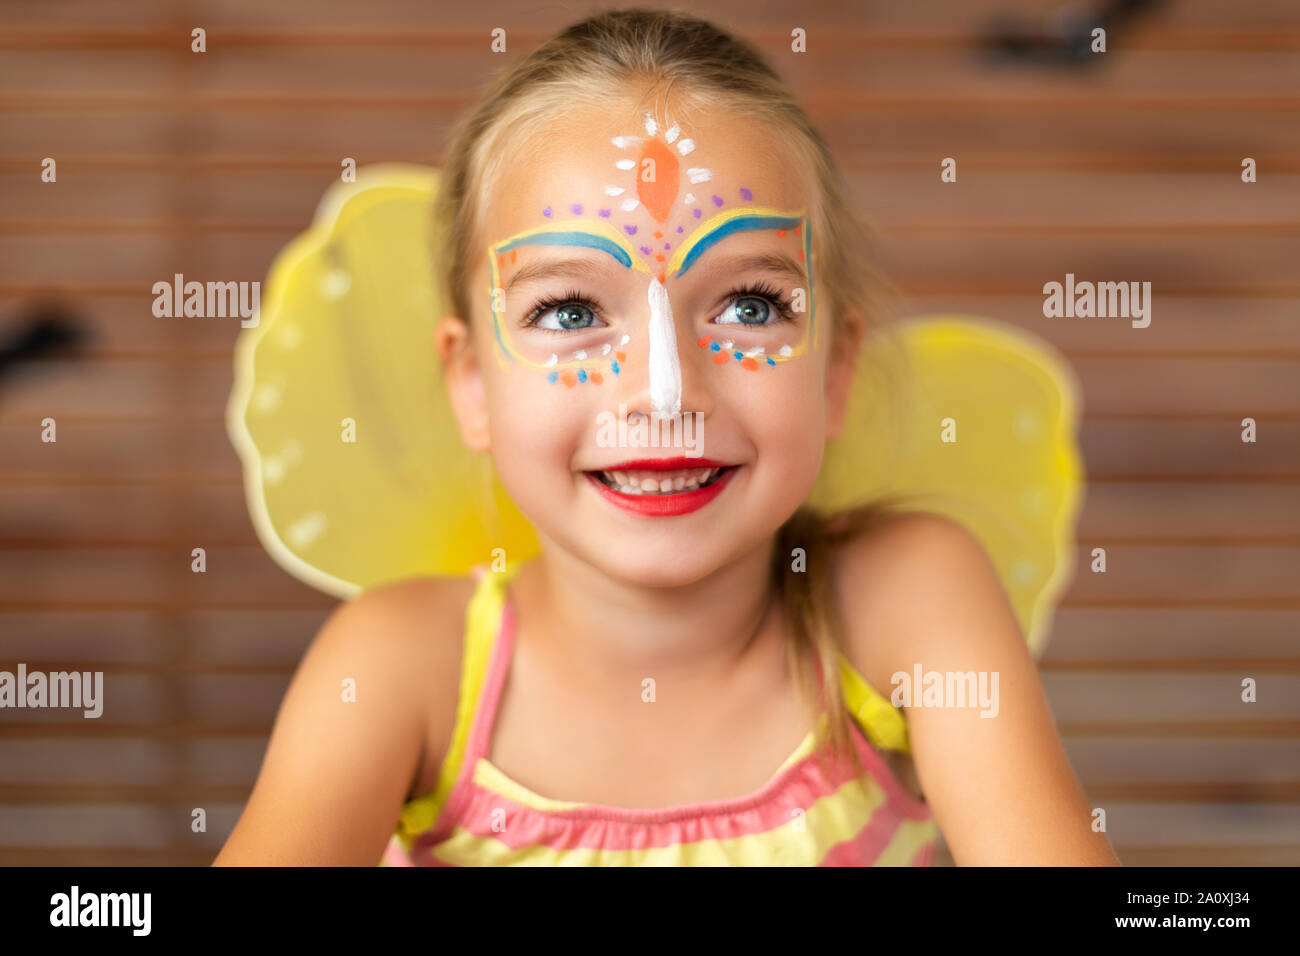 Waist up portrait of cute preschooler with DIY face paint wearing a  butterfly halloween or carnival costume Stock Photo - Alamy